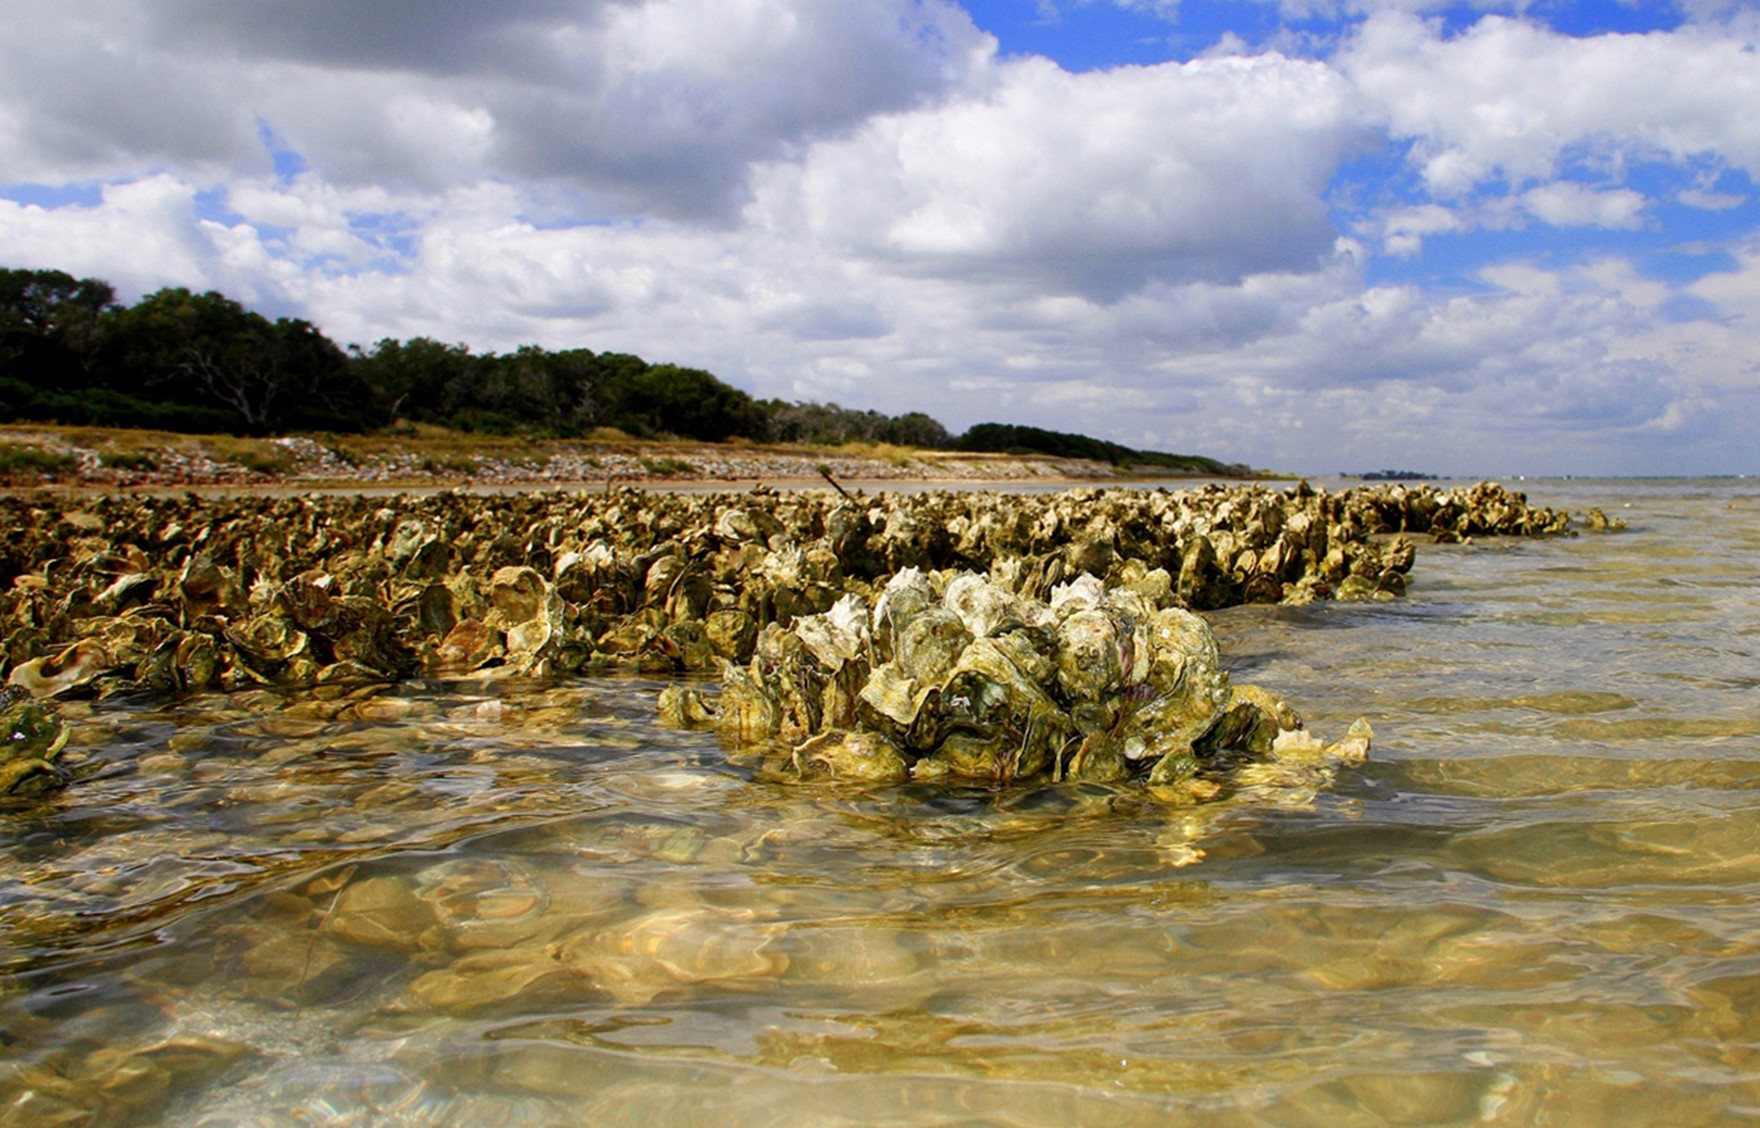 ADVOCACY ALERT: Closing Reefs in Ayres, Mesquite, and Carlos Bays to Oyster Harvest